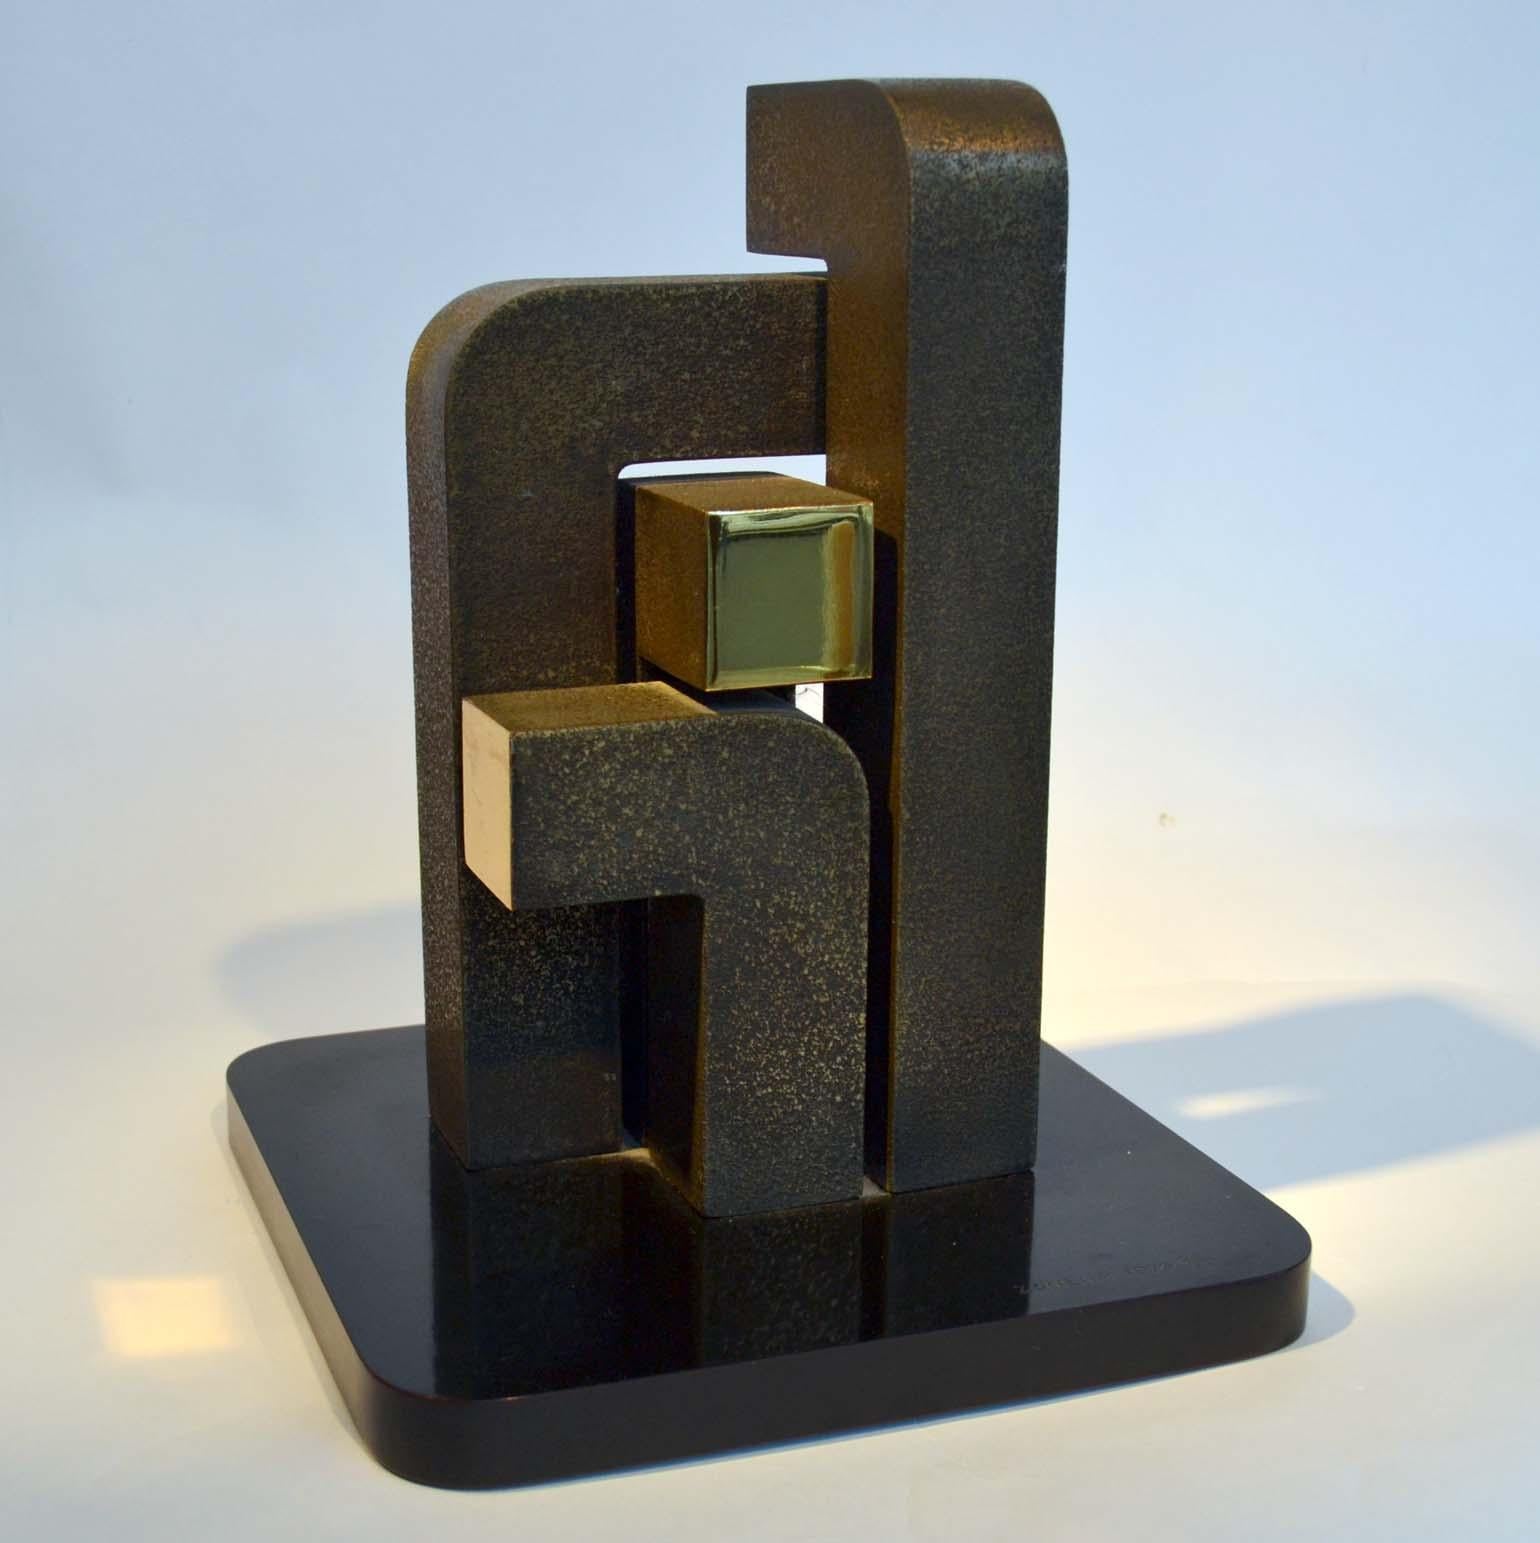 Abstract Geometric Minimalist Bronze Sculpture by Zonena 1979 in Limited Edition 7